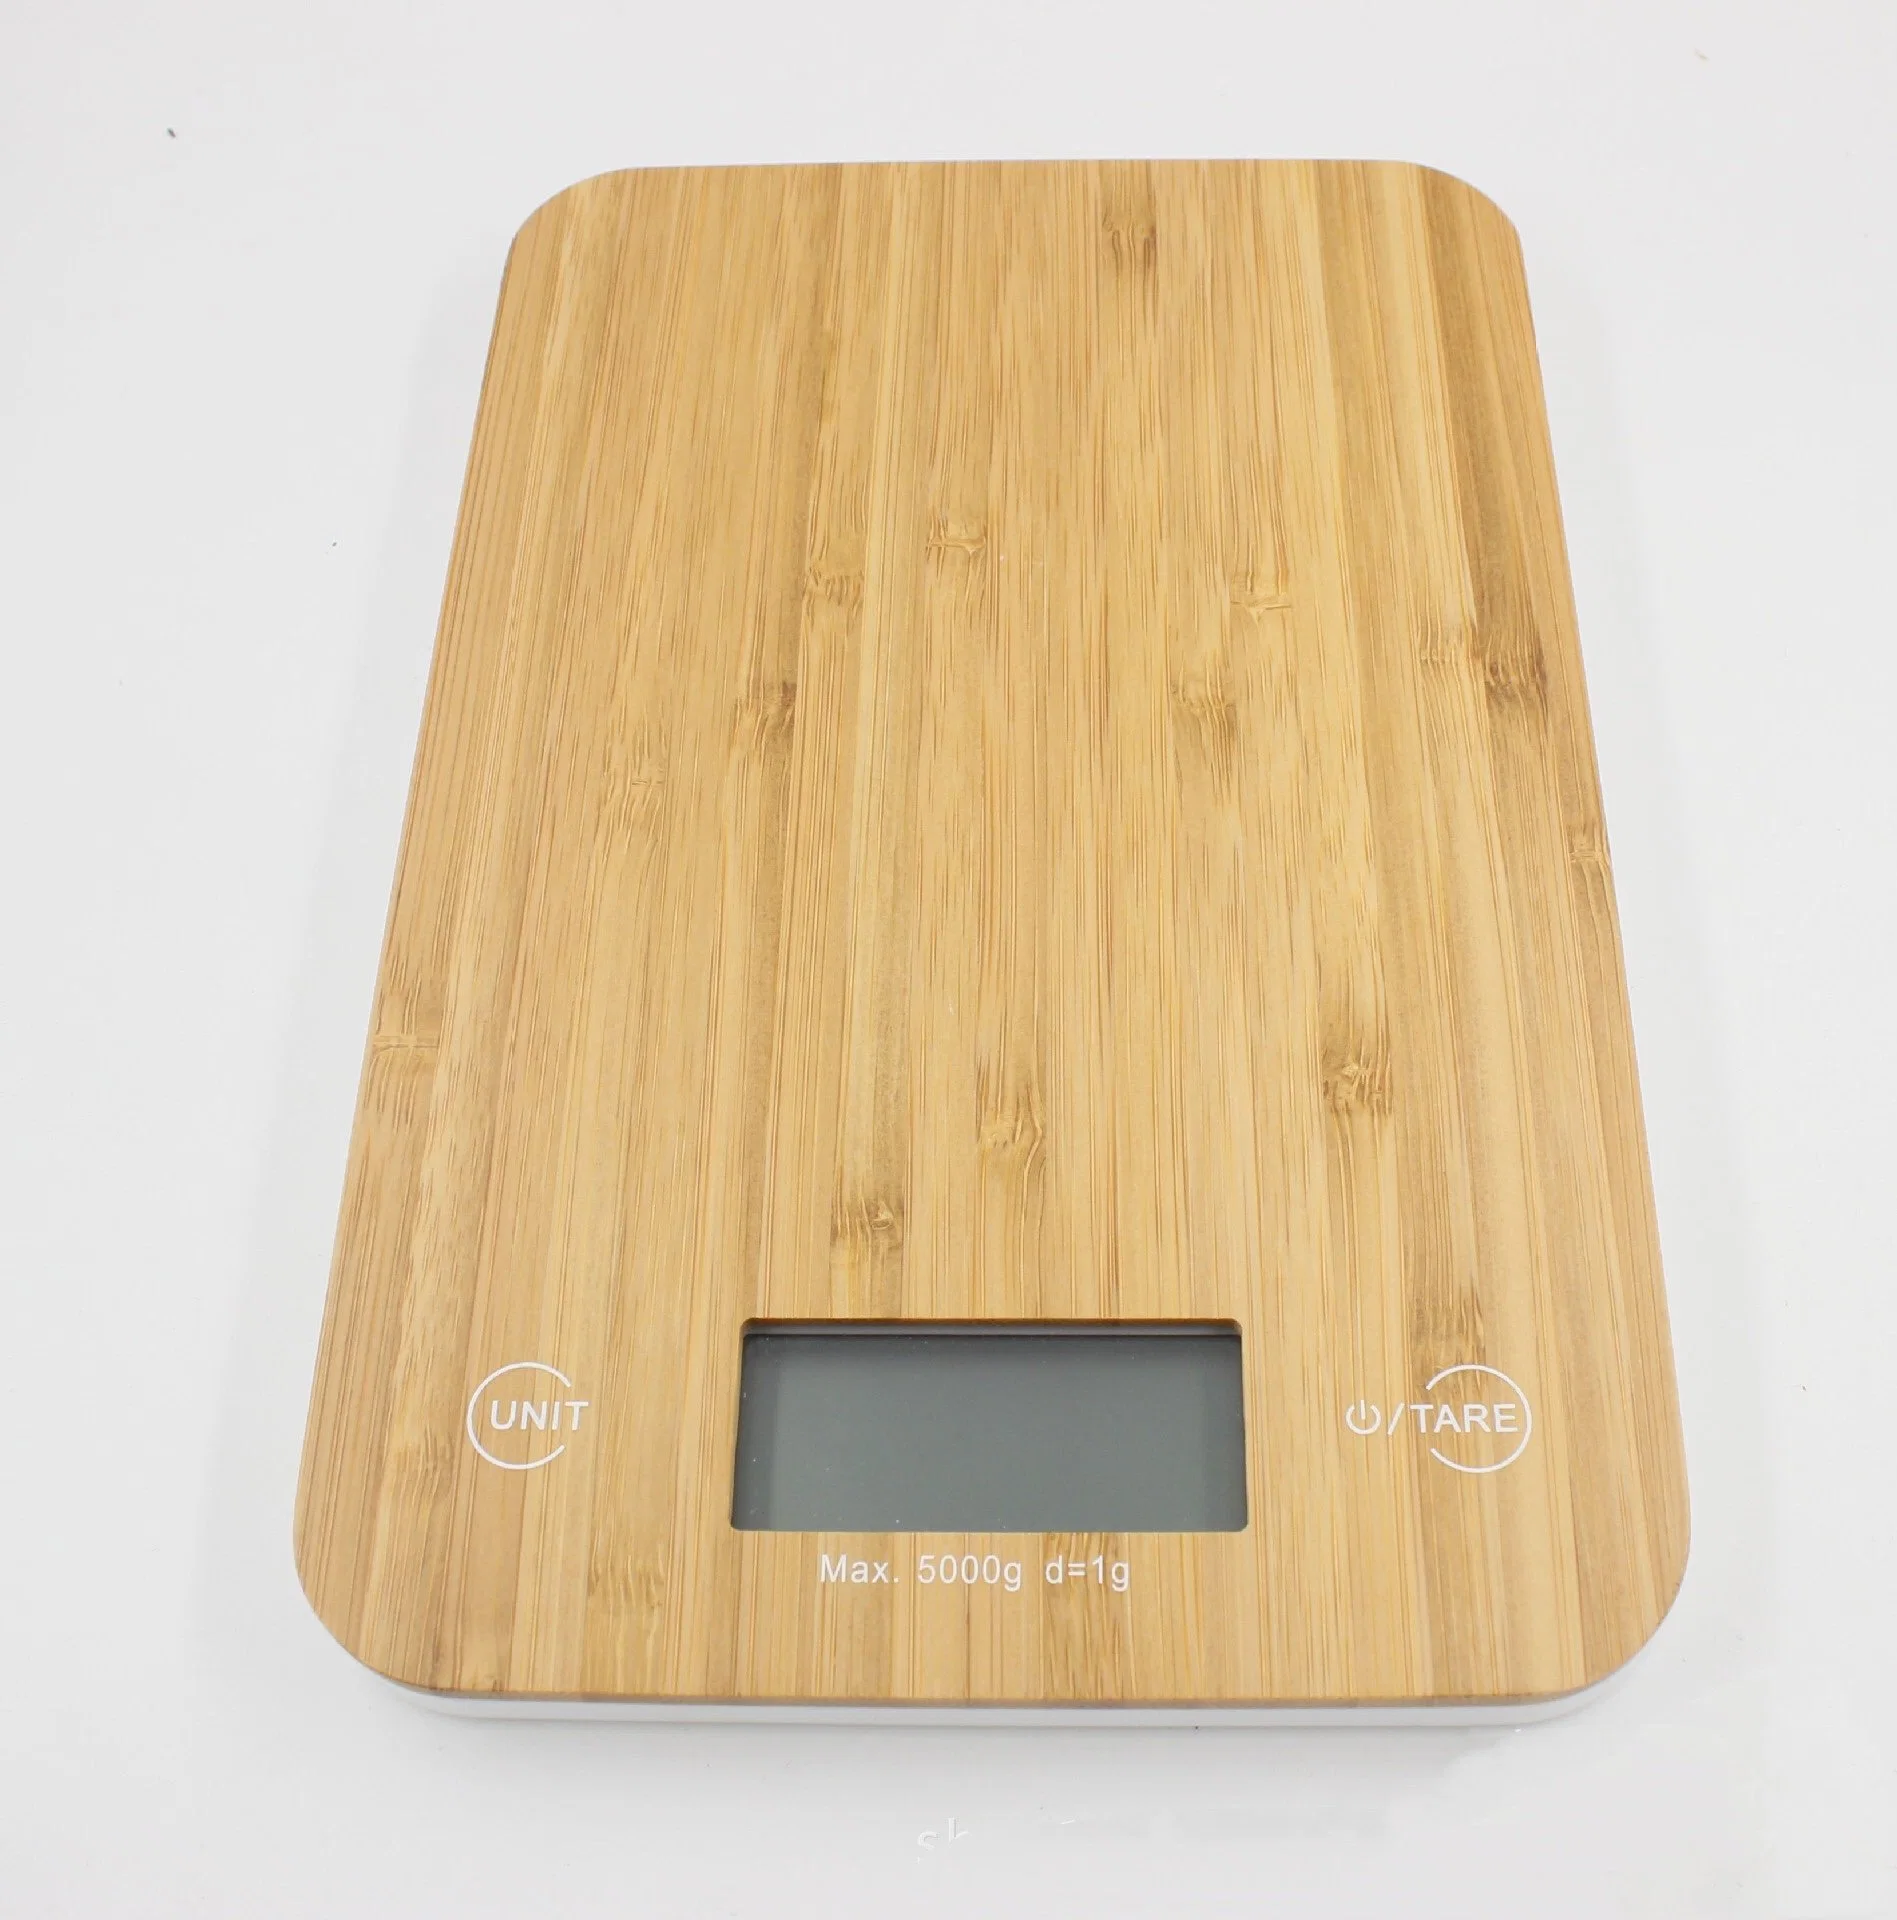 Smart Cooking Digital Tool Bamboo Weighing Scale Food Kitchen Scale